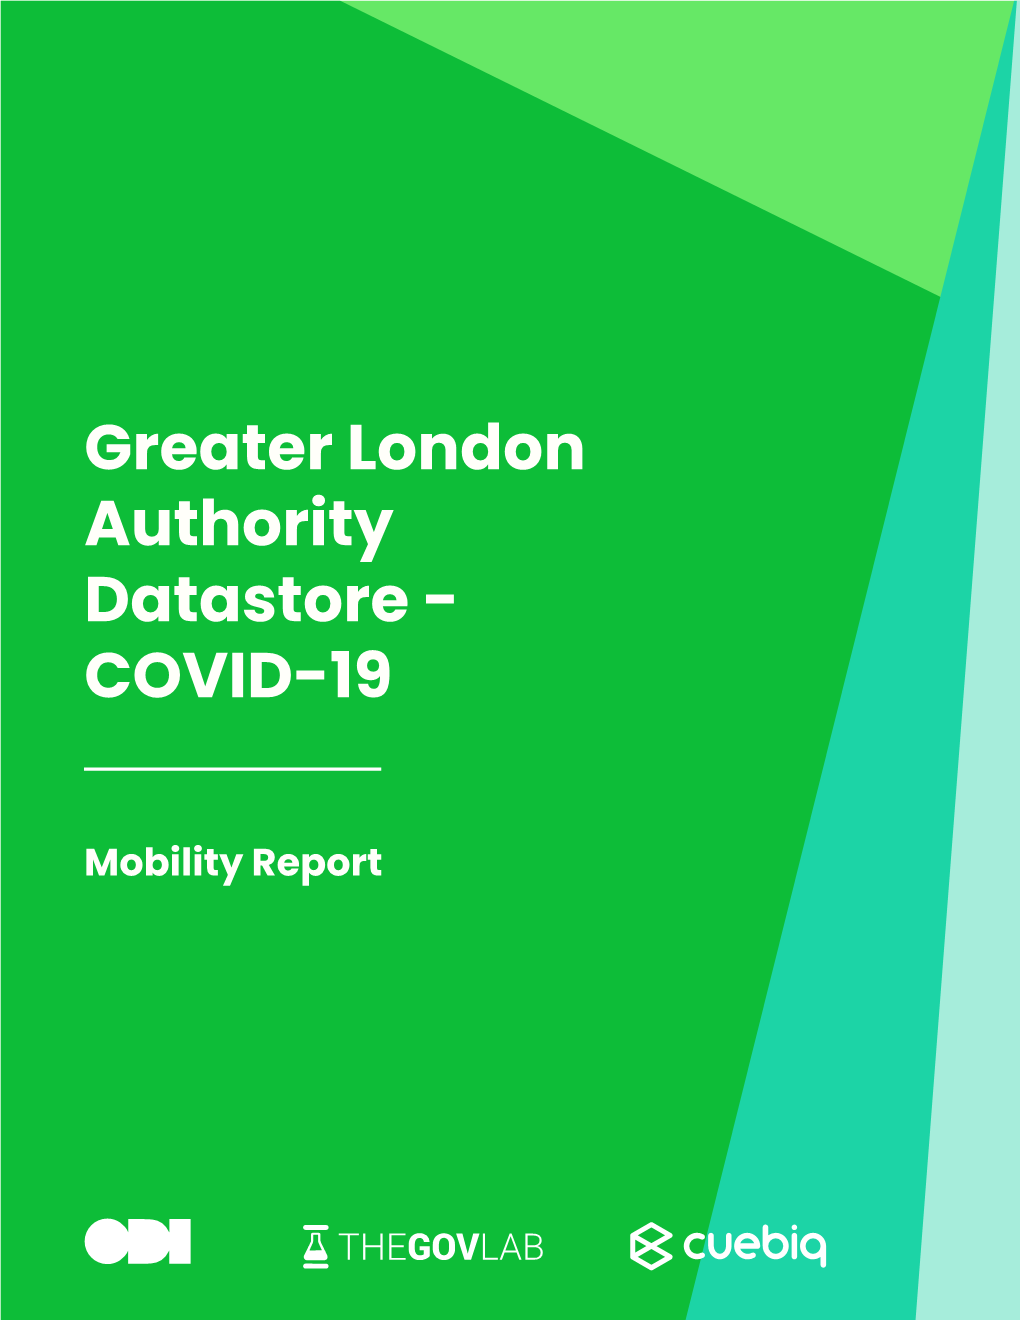 Greater London Authority Datastore - COVID-19